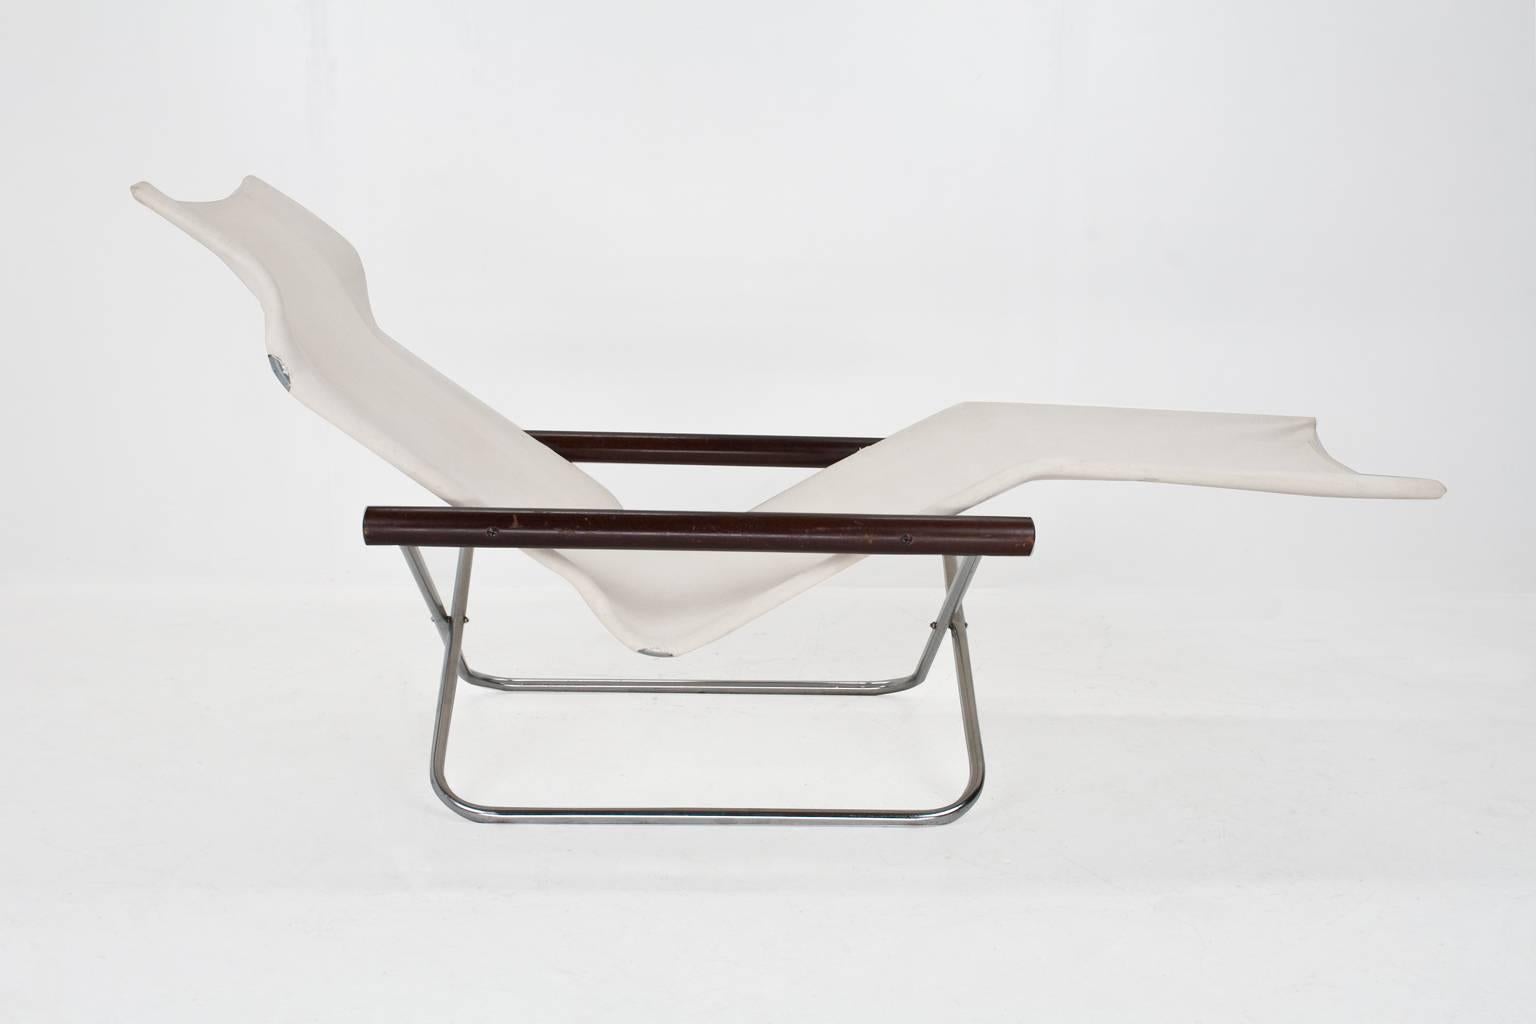 Takeshi Nii "NY" folding chaise longue chair. Chromed tubular metal frame with beechwood supports and off-white canvas sling seat, original condition. The fabric is intact and in good shape, but has spots conforming use. The design was